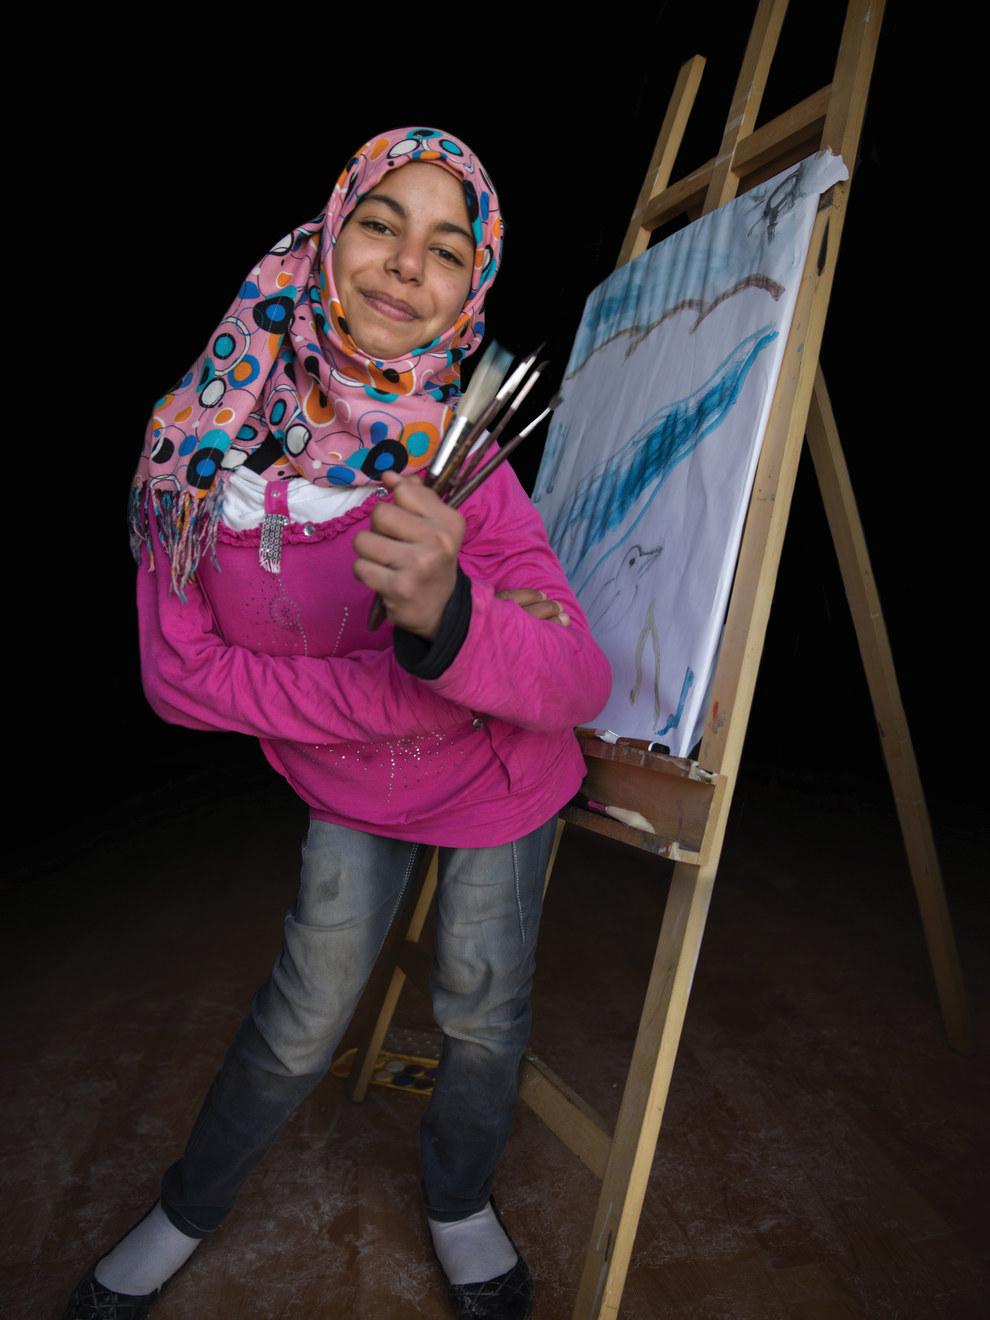 Merwa, 13, wants to be a painter.